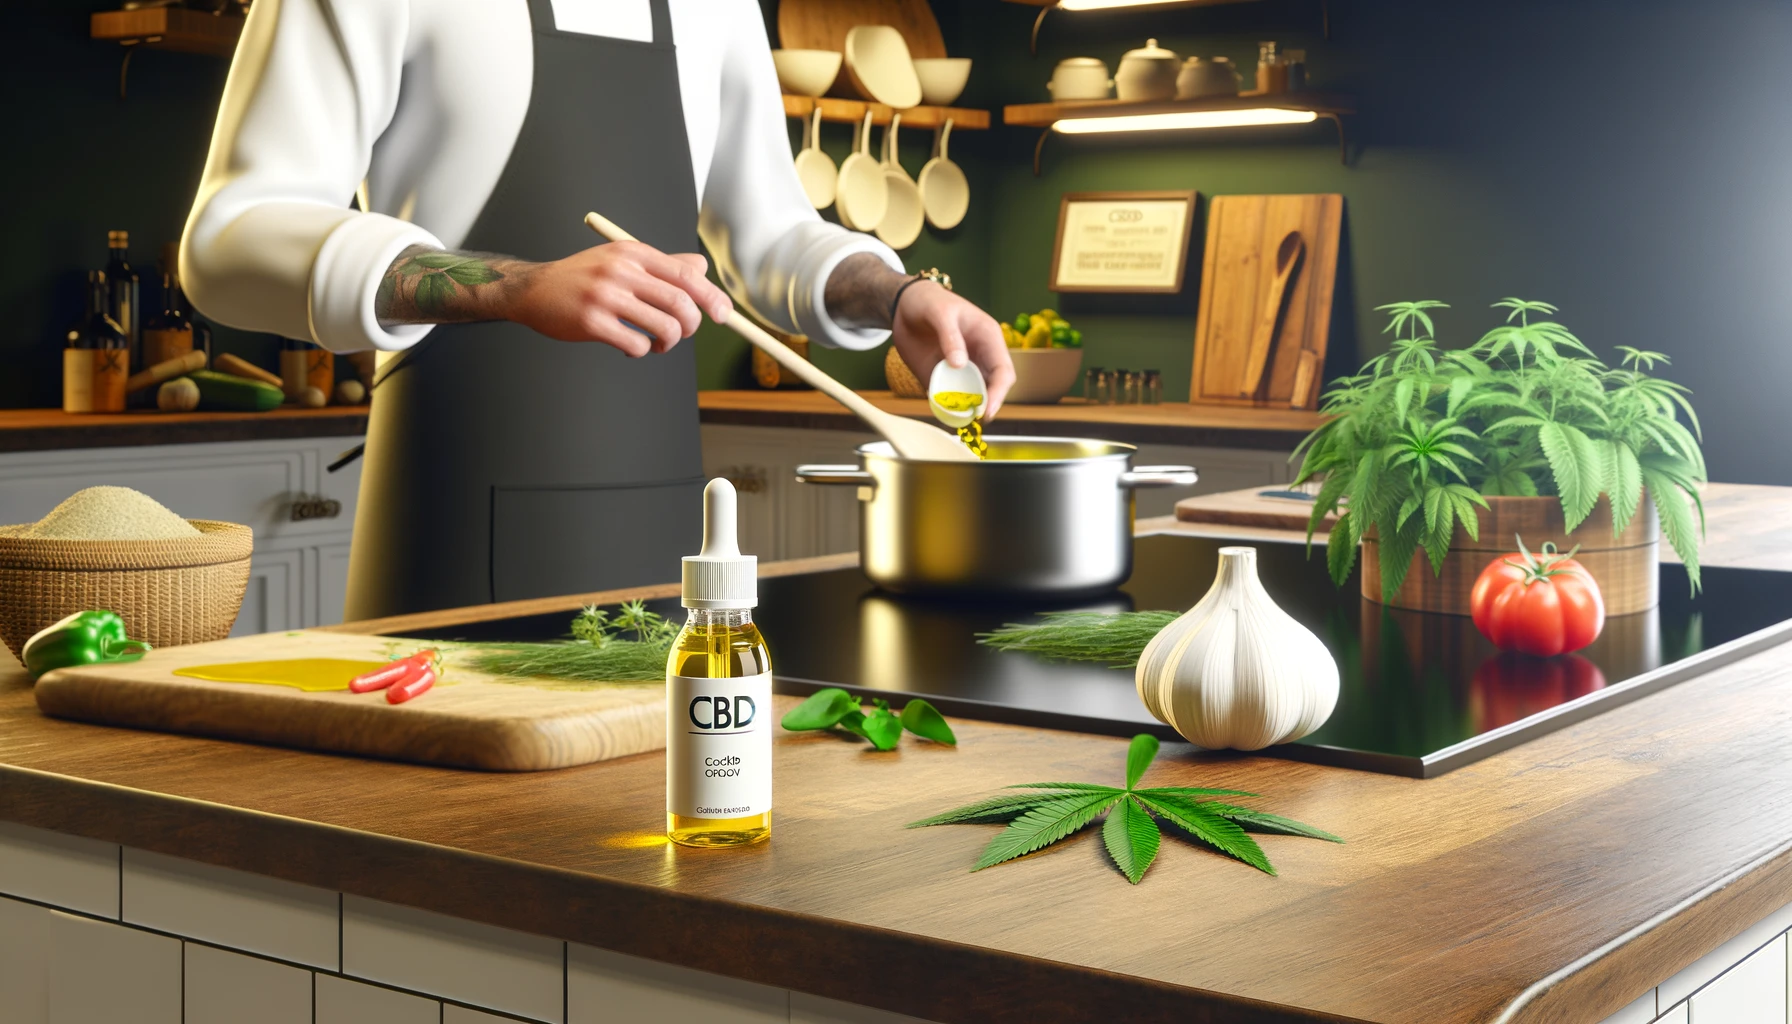 Cooking with CBD now